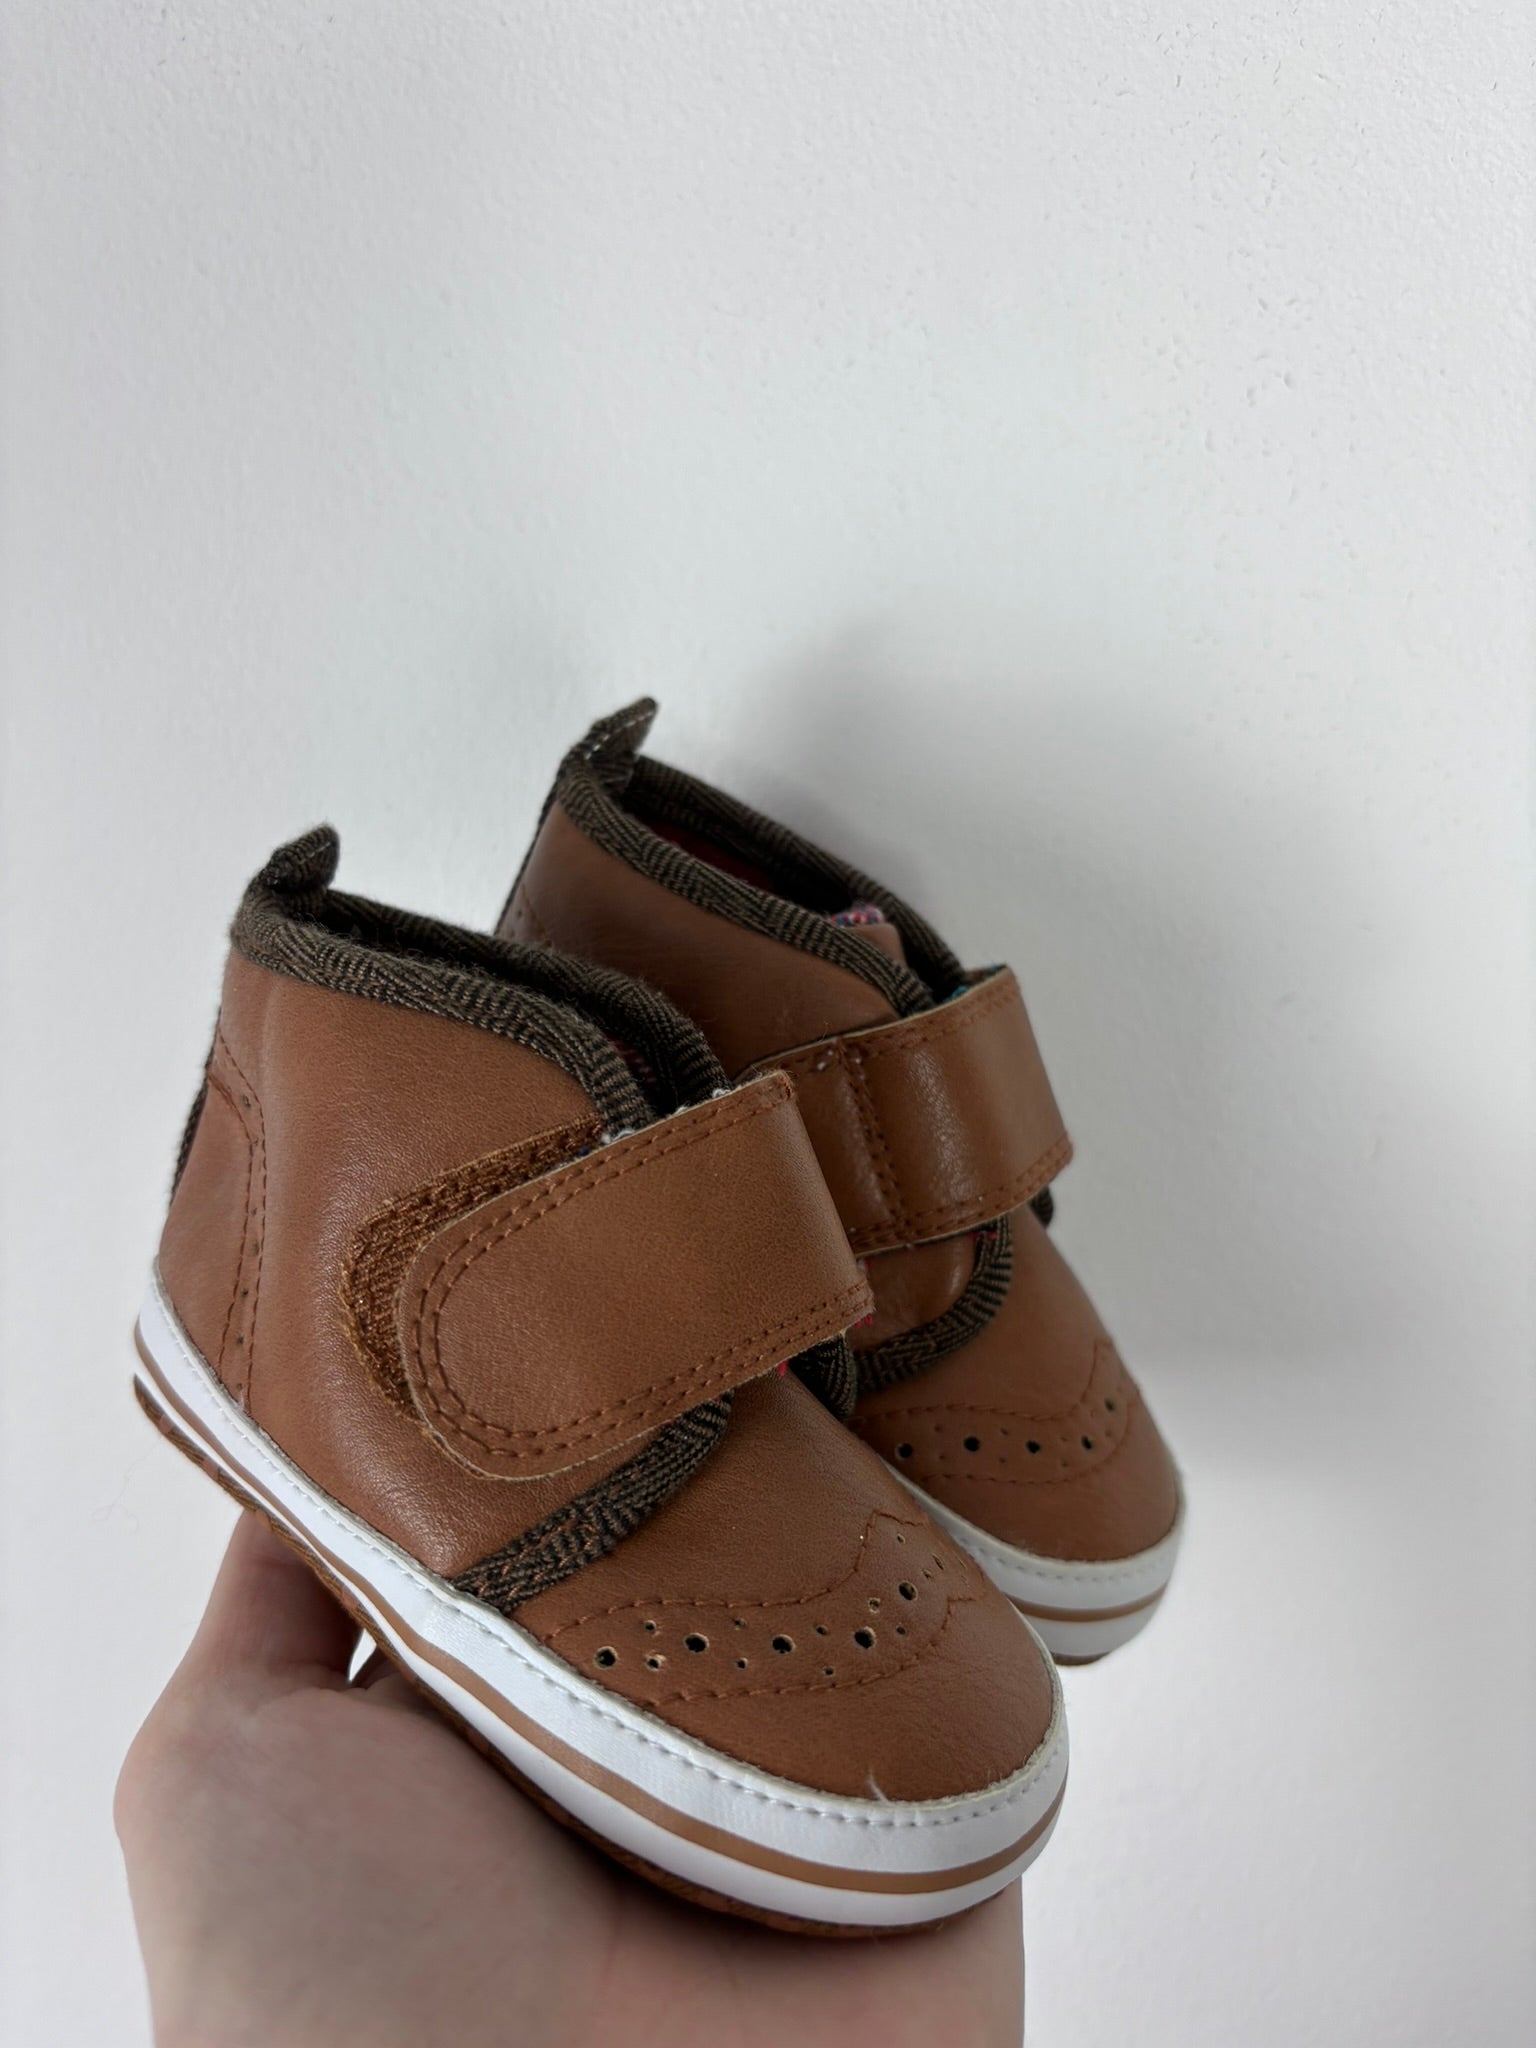 Mothercare UK 2 (Baby)-Shoes-Second Snuggle Preloved